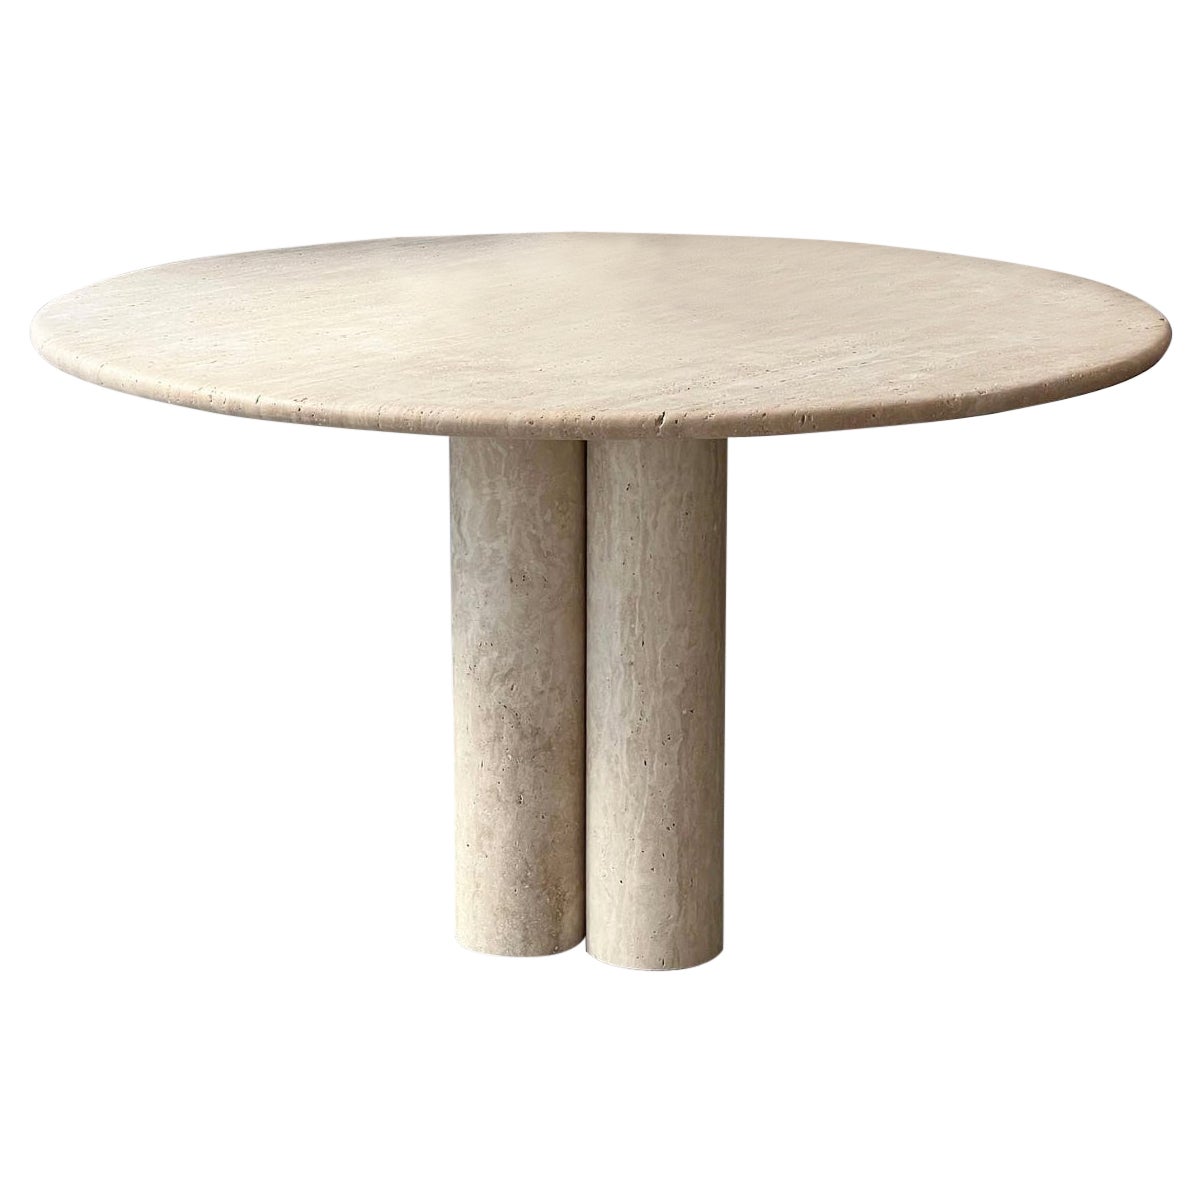 Cream Travertine Round Dining Table, in the style of 1970 Mario Bellini